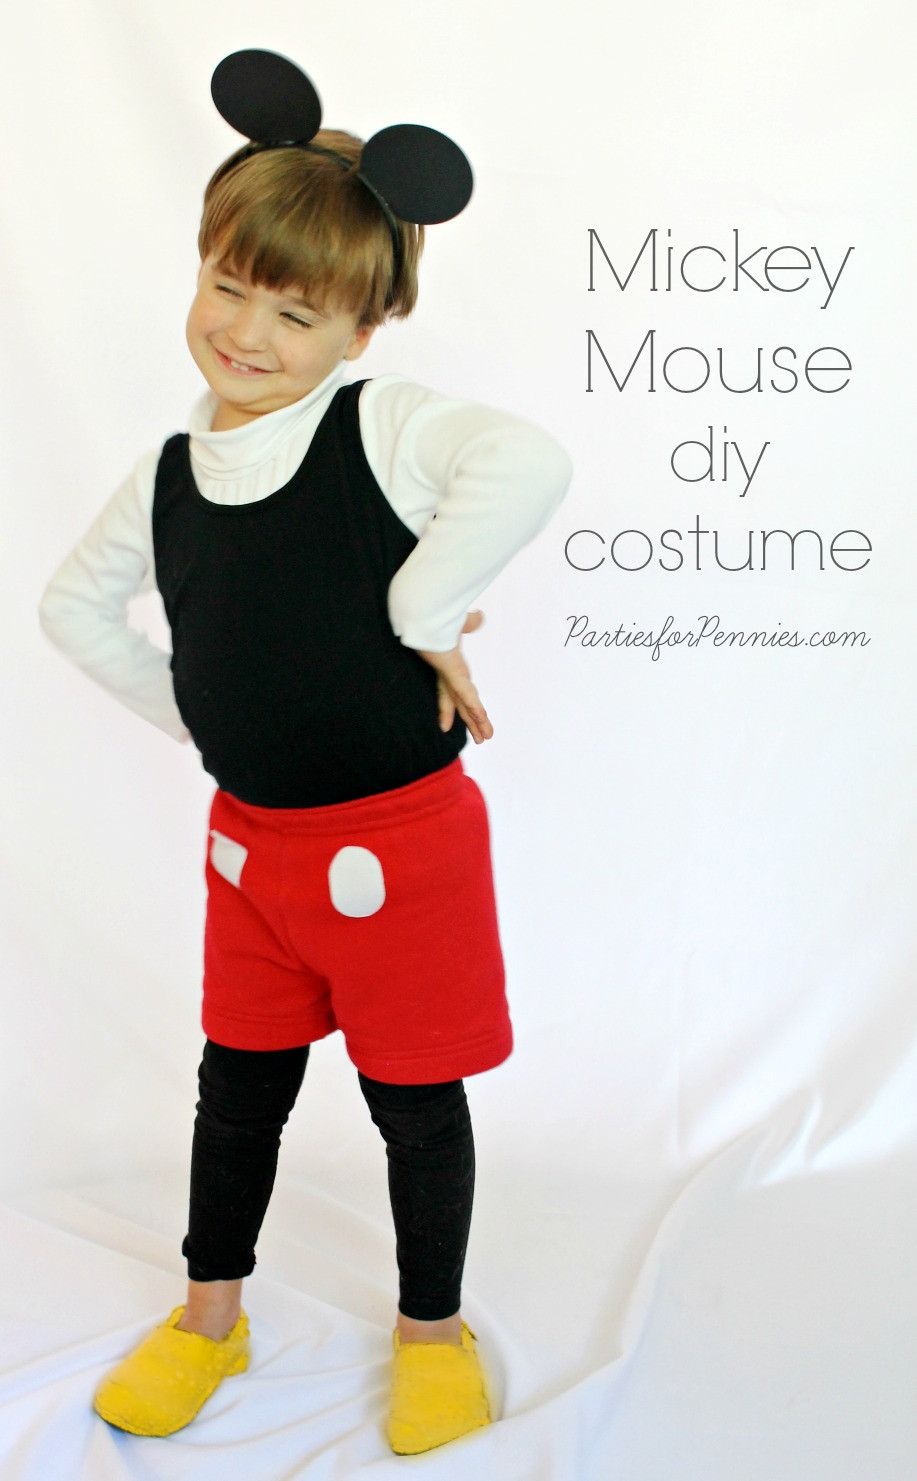 Mickey Mouse Costumes DIY
 DIY Halloween Costumes Parties for Pennies